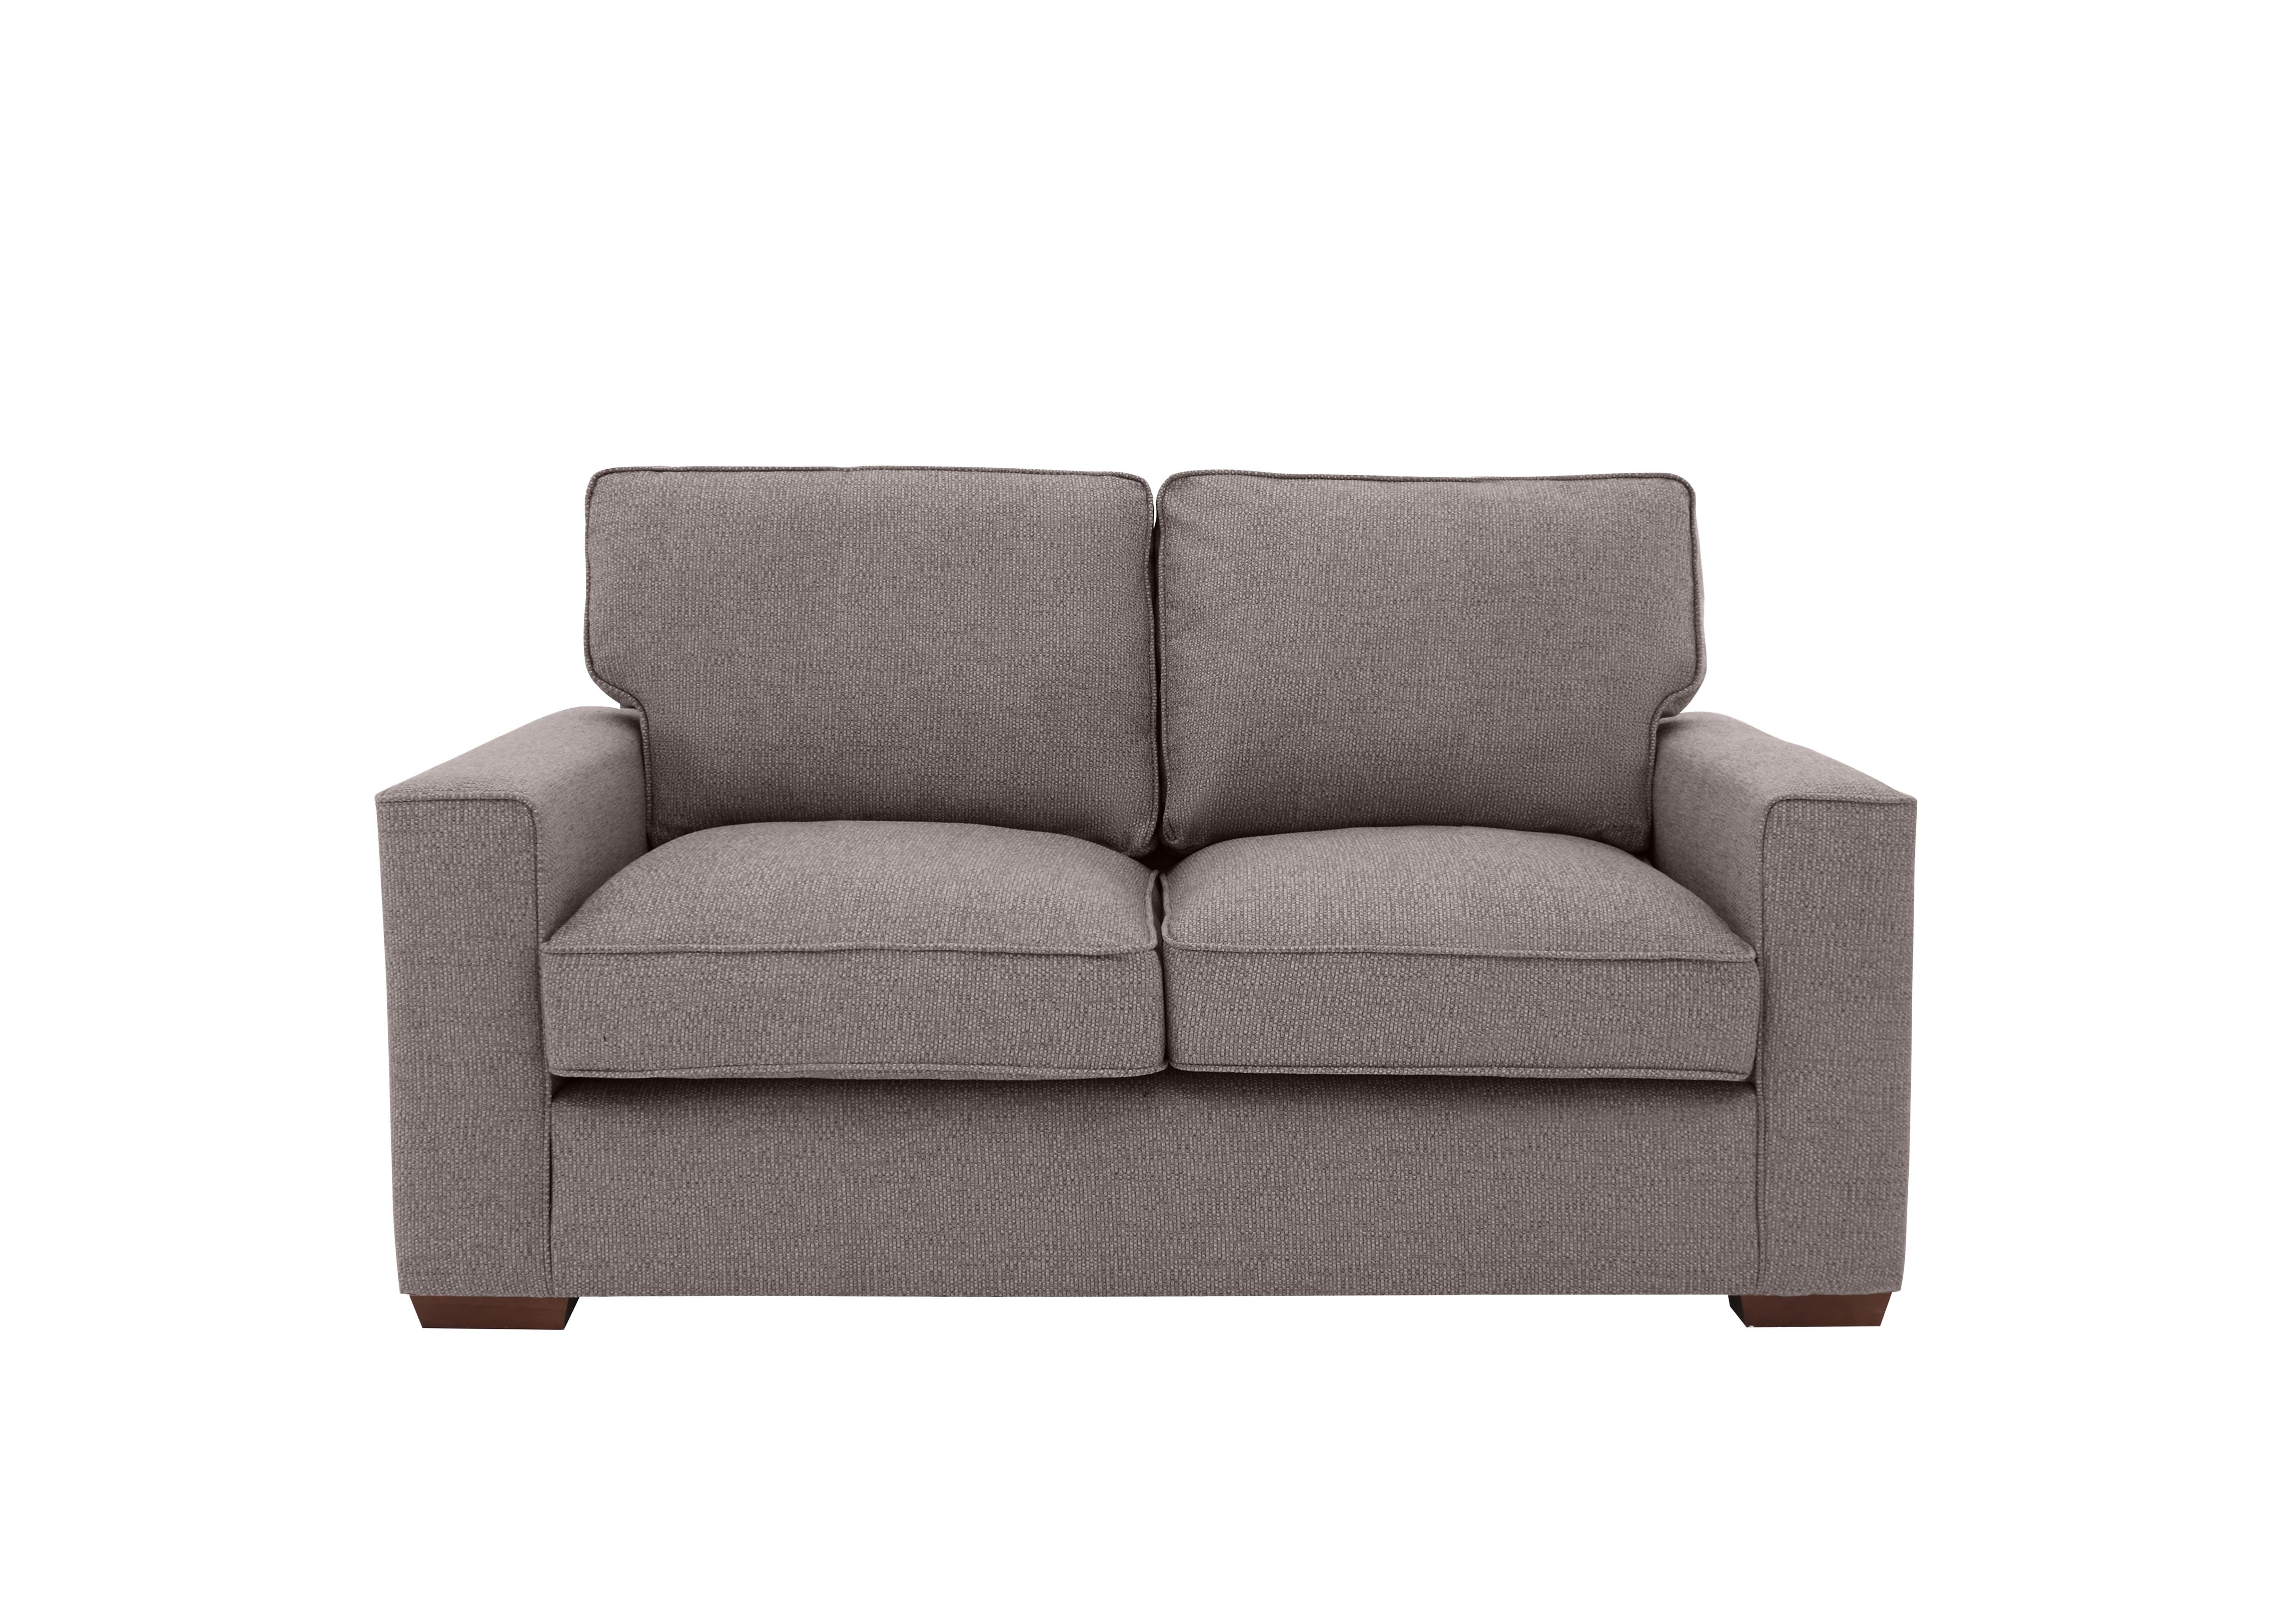 Cory 2 Seater Fabric Classic Back Sofa Bed in Dallas Taupe on Furniture Village